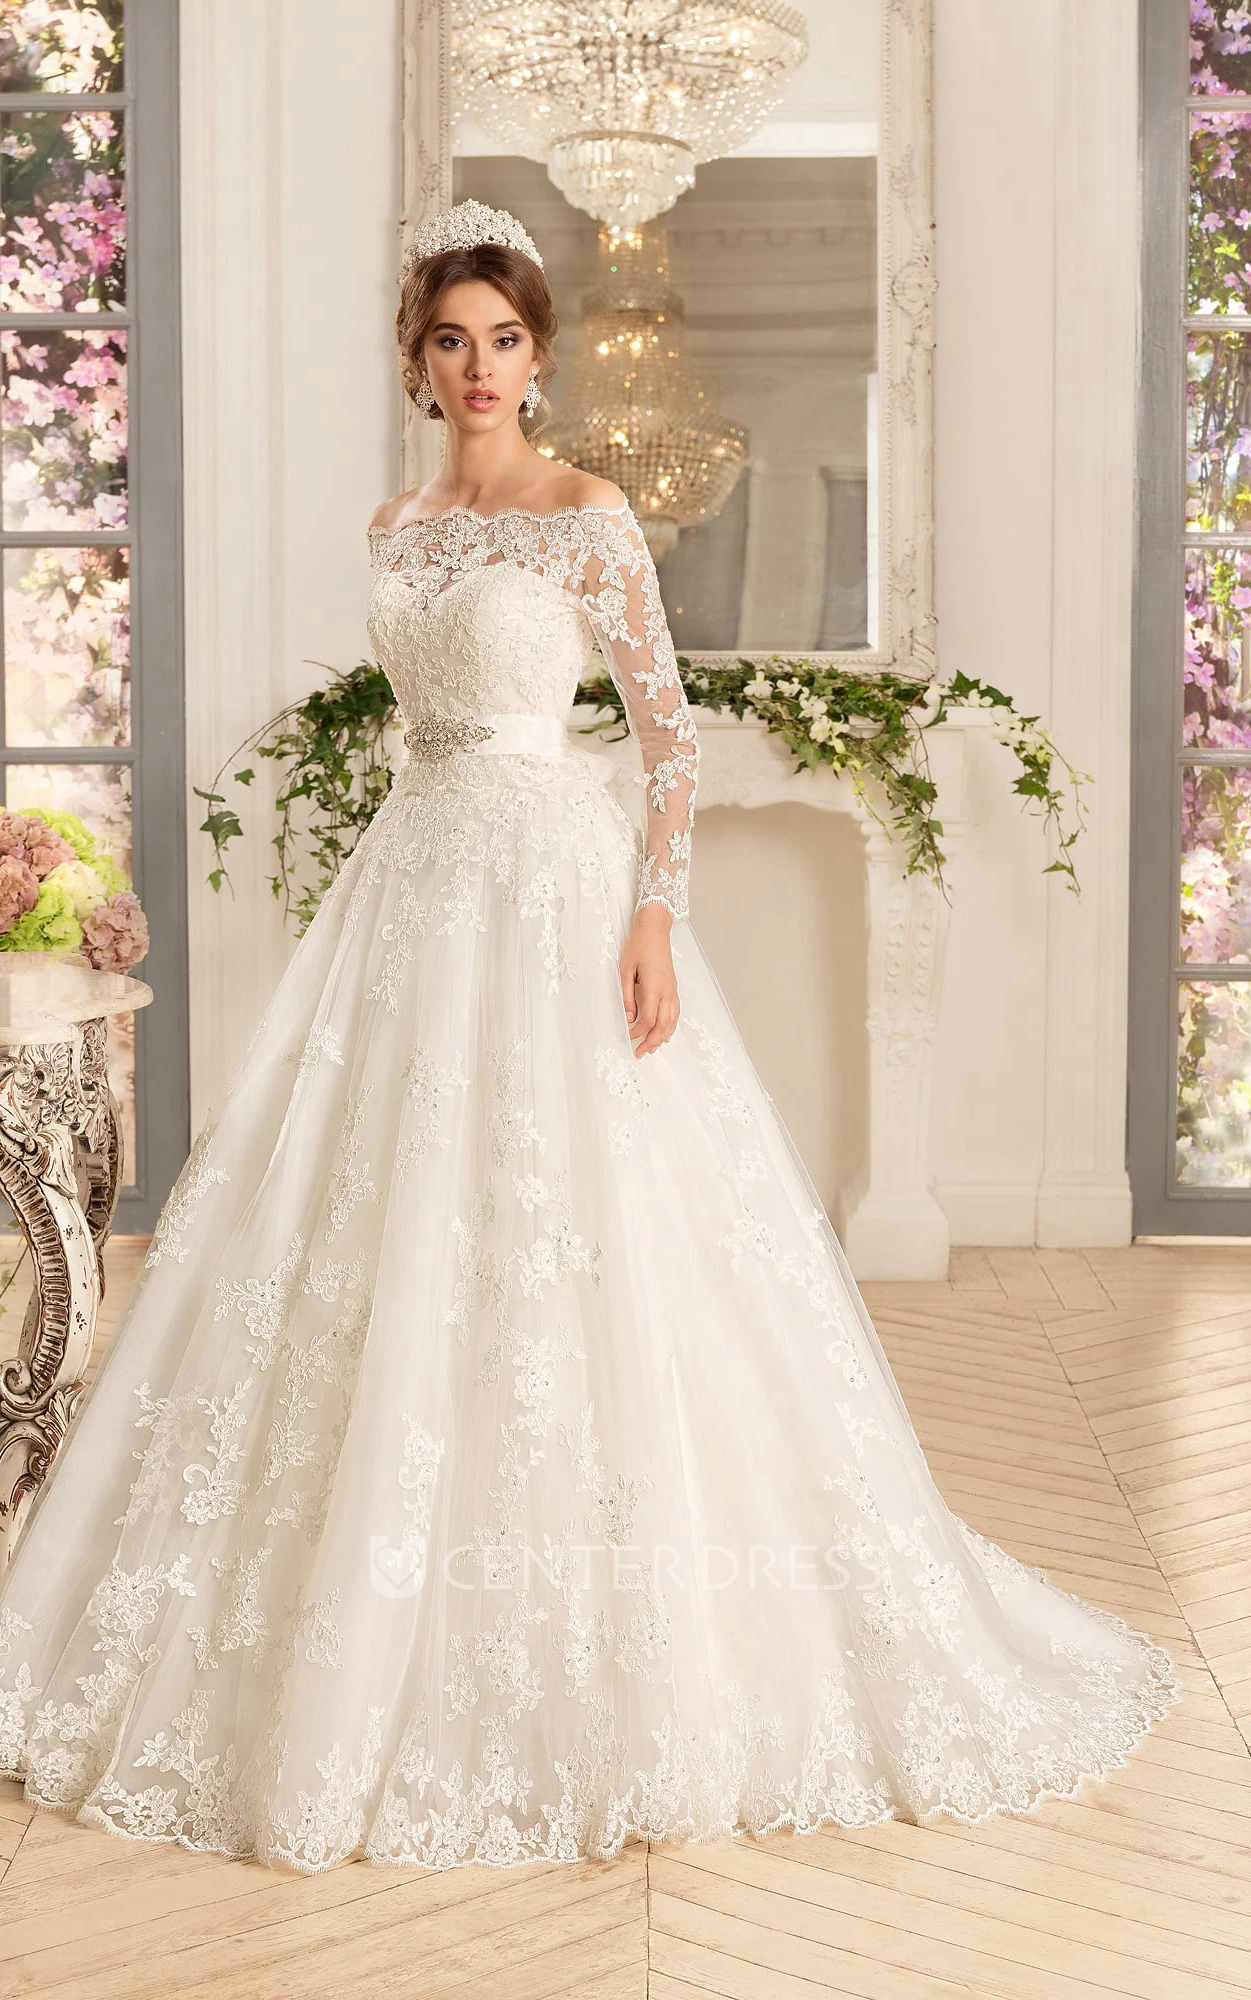 Lace Sheath Gown With Cape